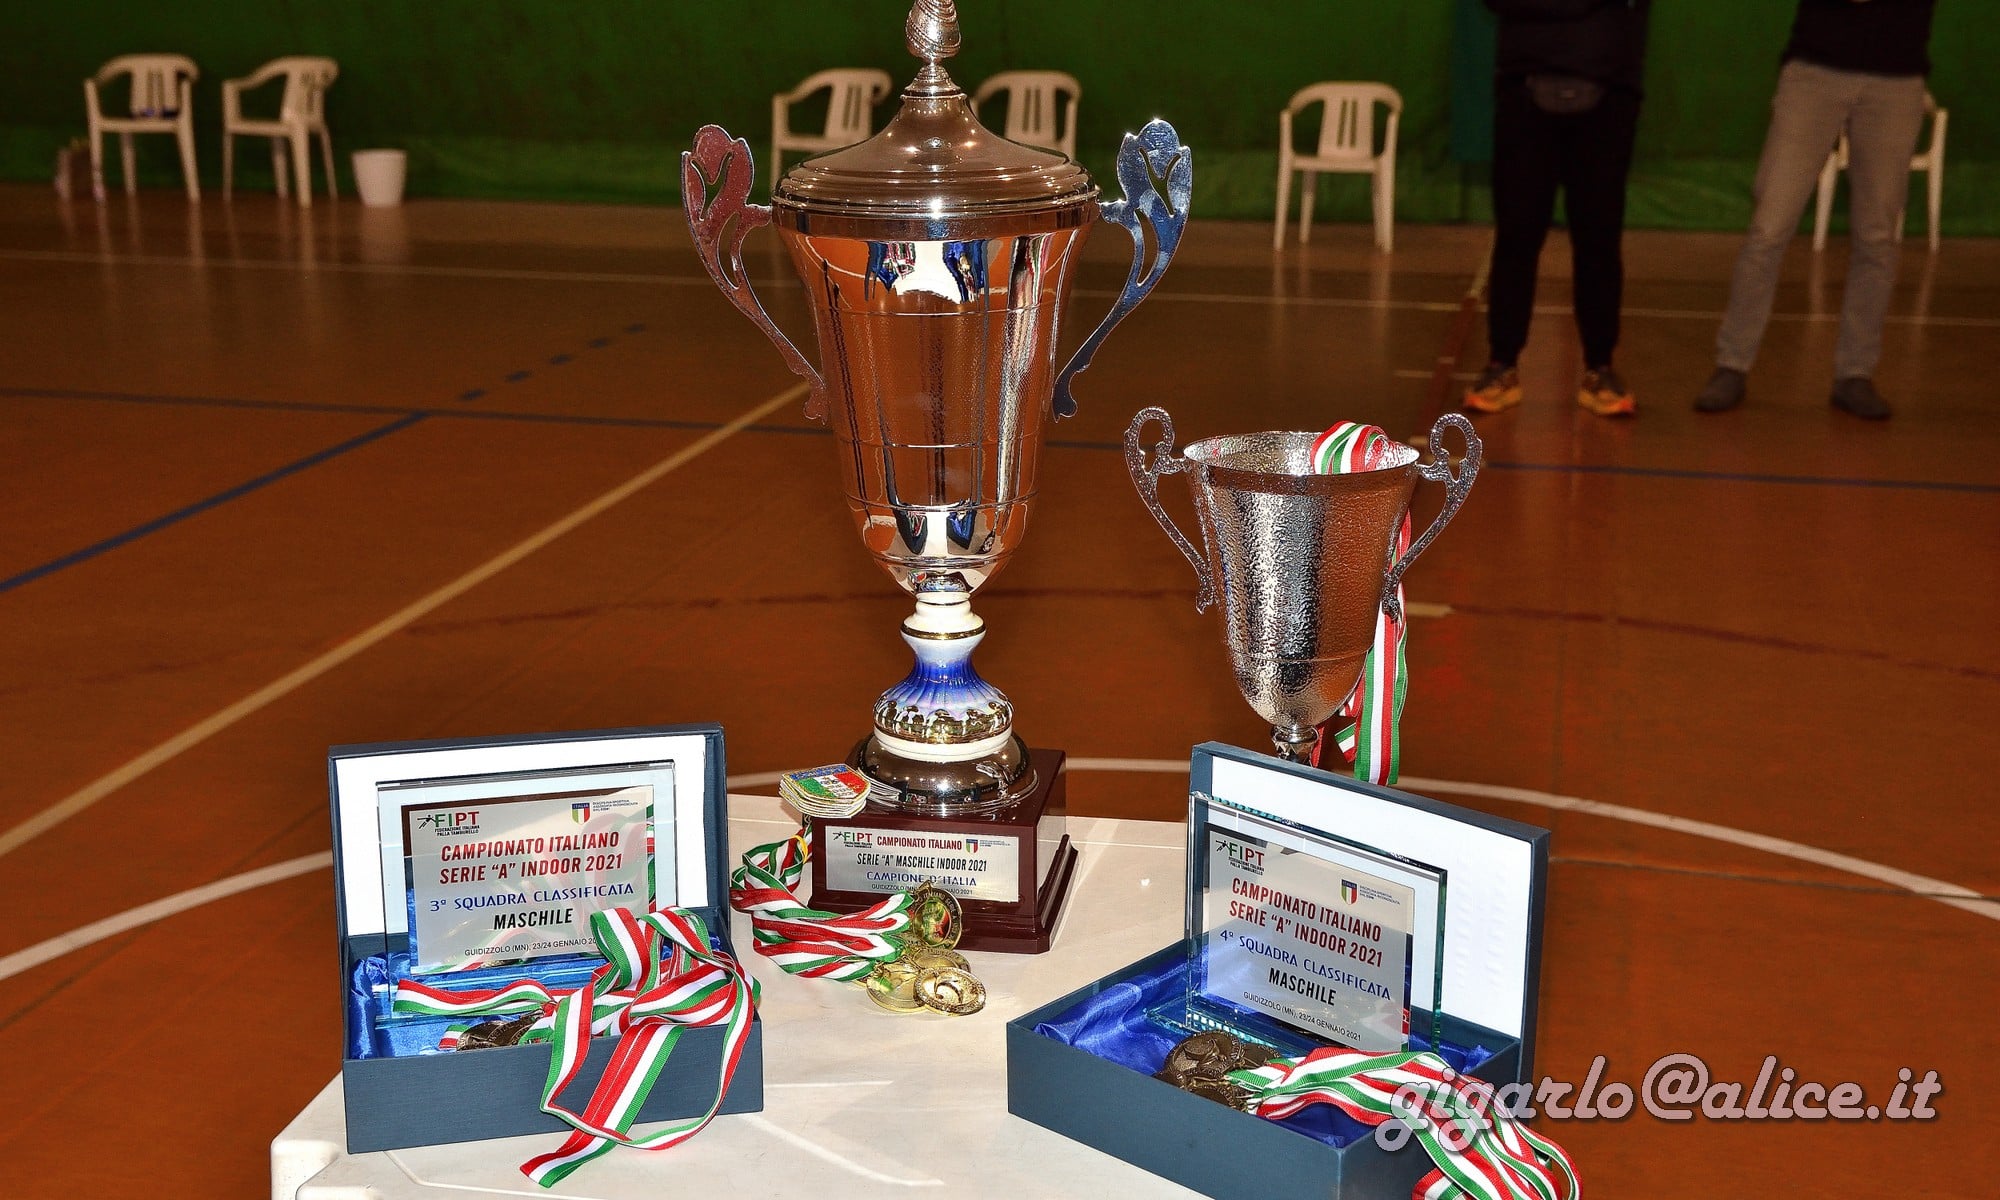 images/News_2021/Serie_A_INDOOR-Maschile/23-24.01.2021/141756913_4497797080237513_4360162932645006043_o.jpg